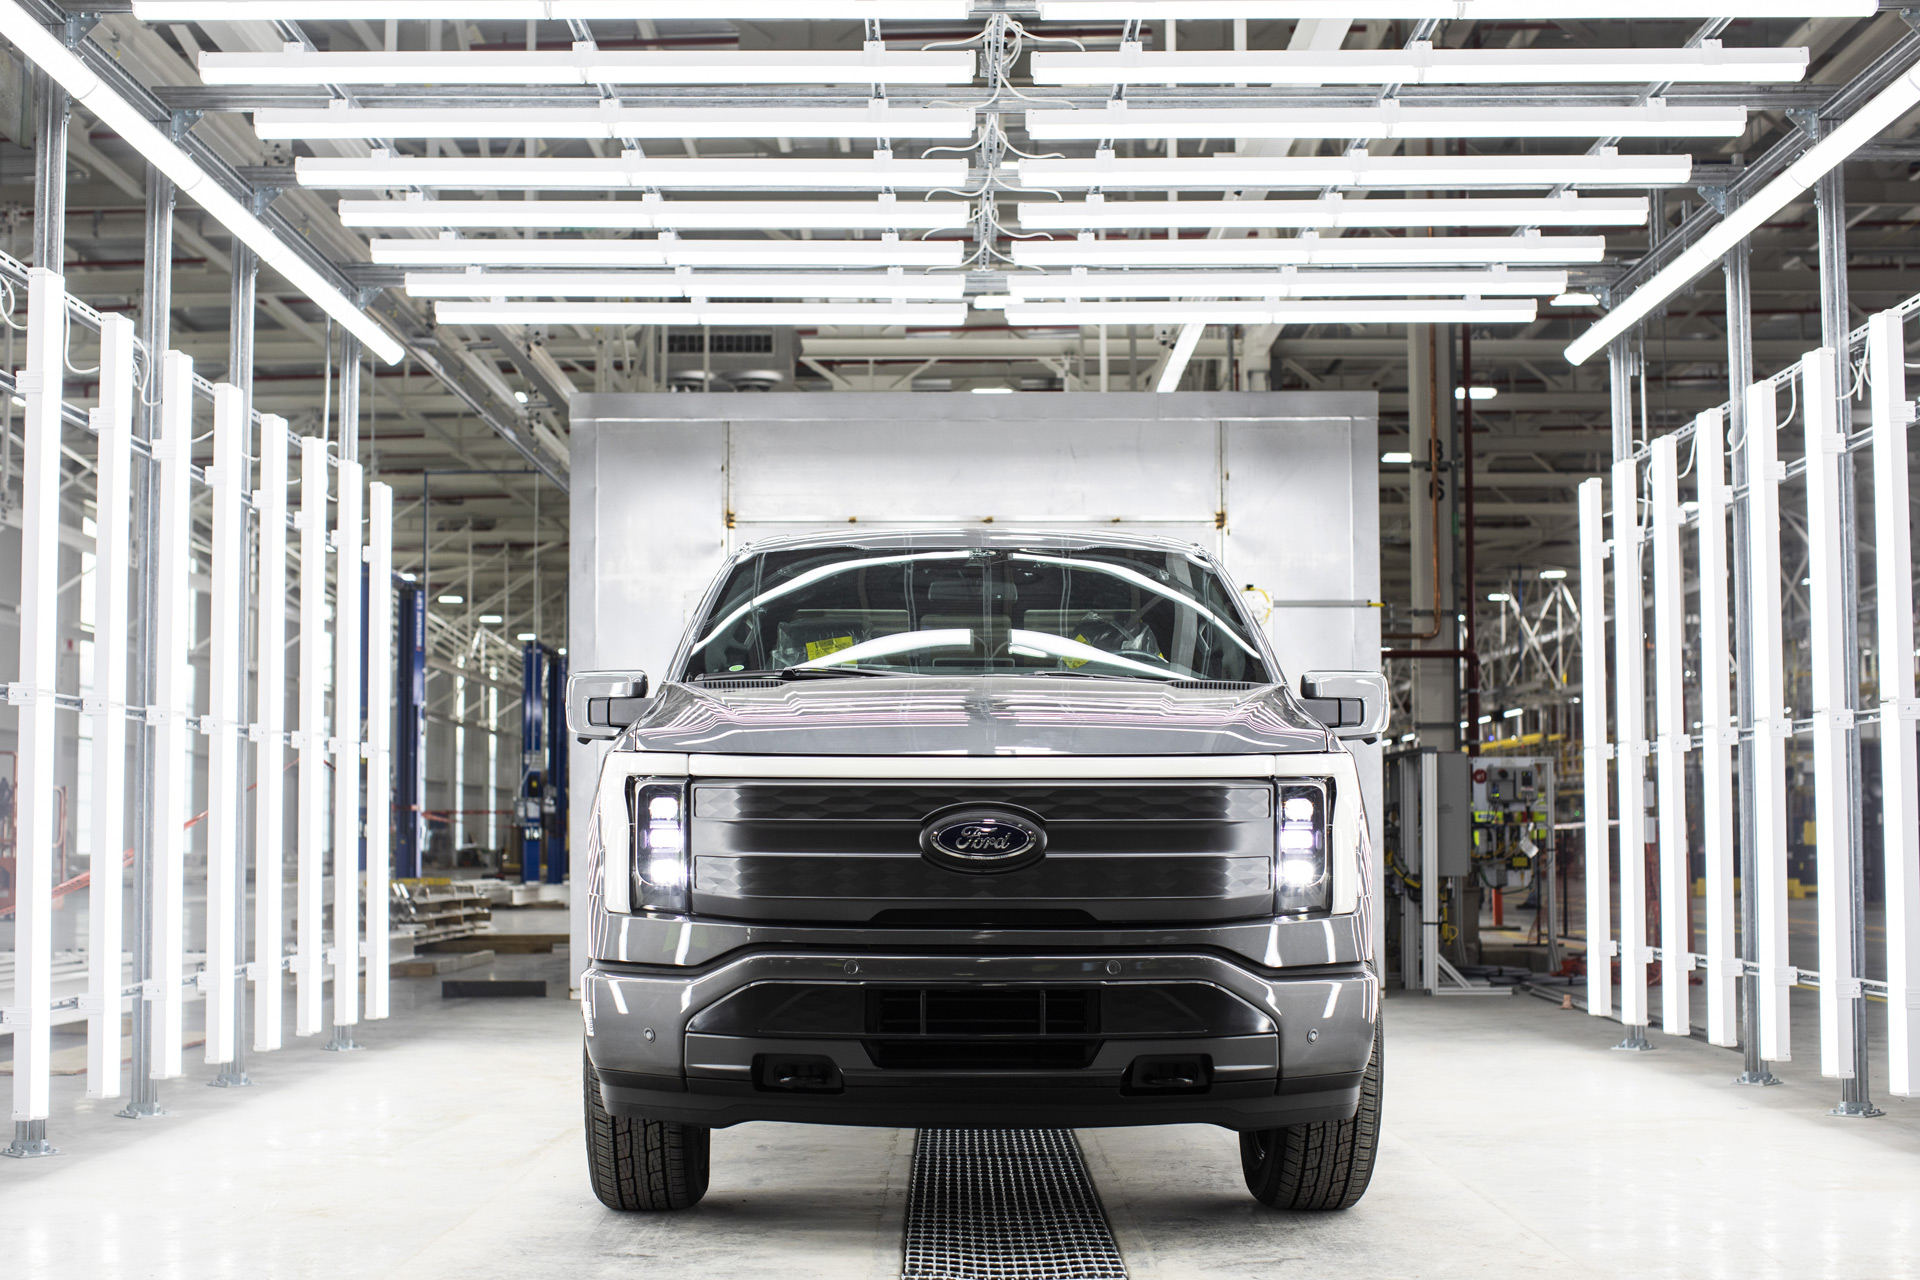 Ford ideas a whole-dimensions electric powered truck with “unbelievably higher quantity”